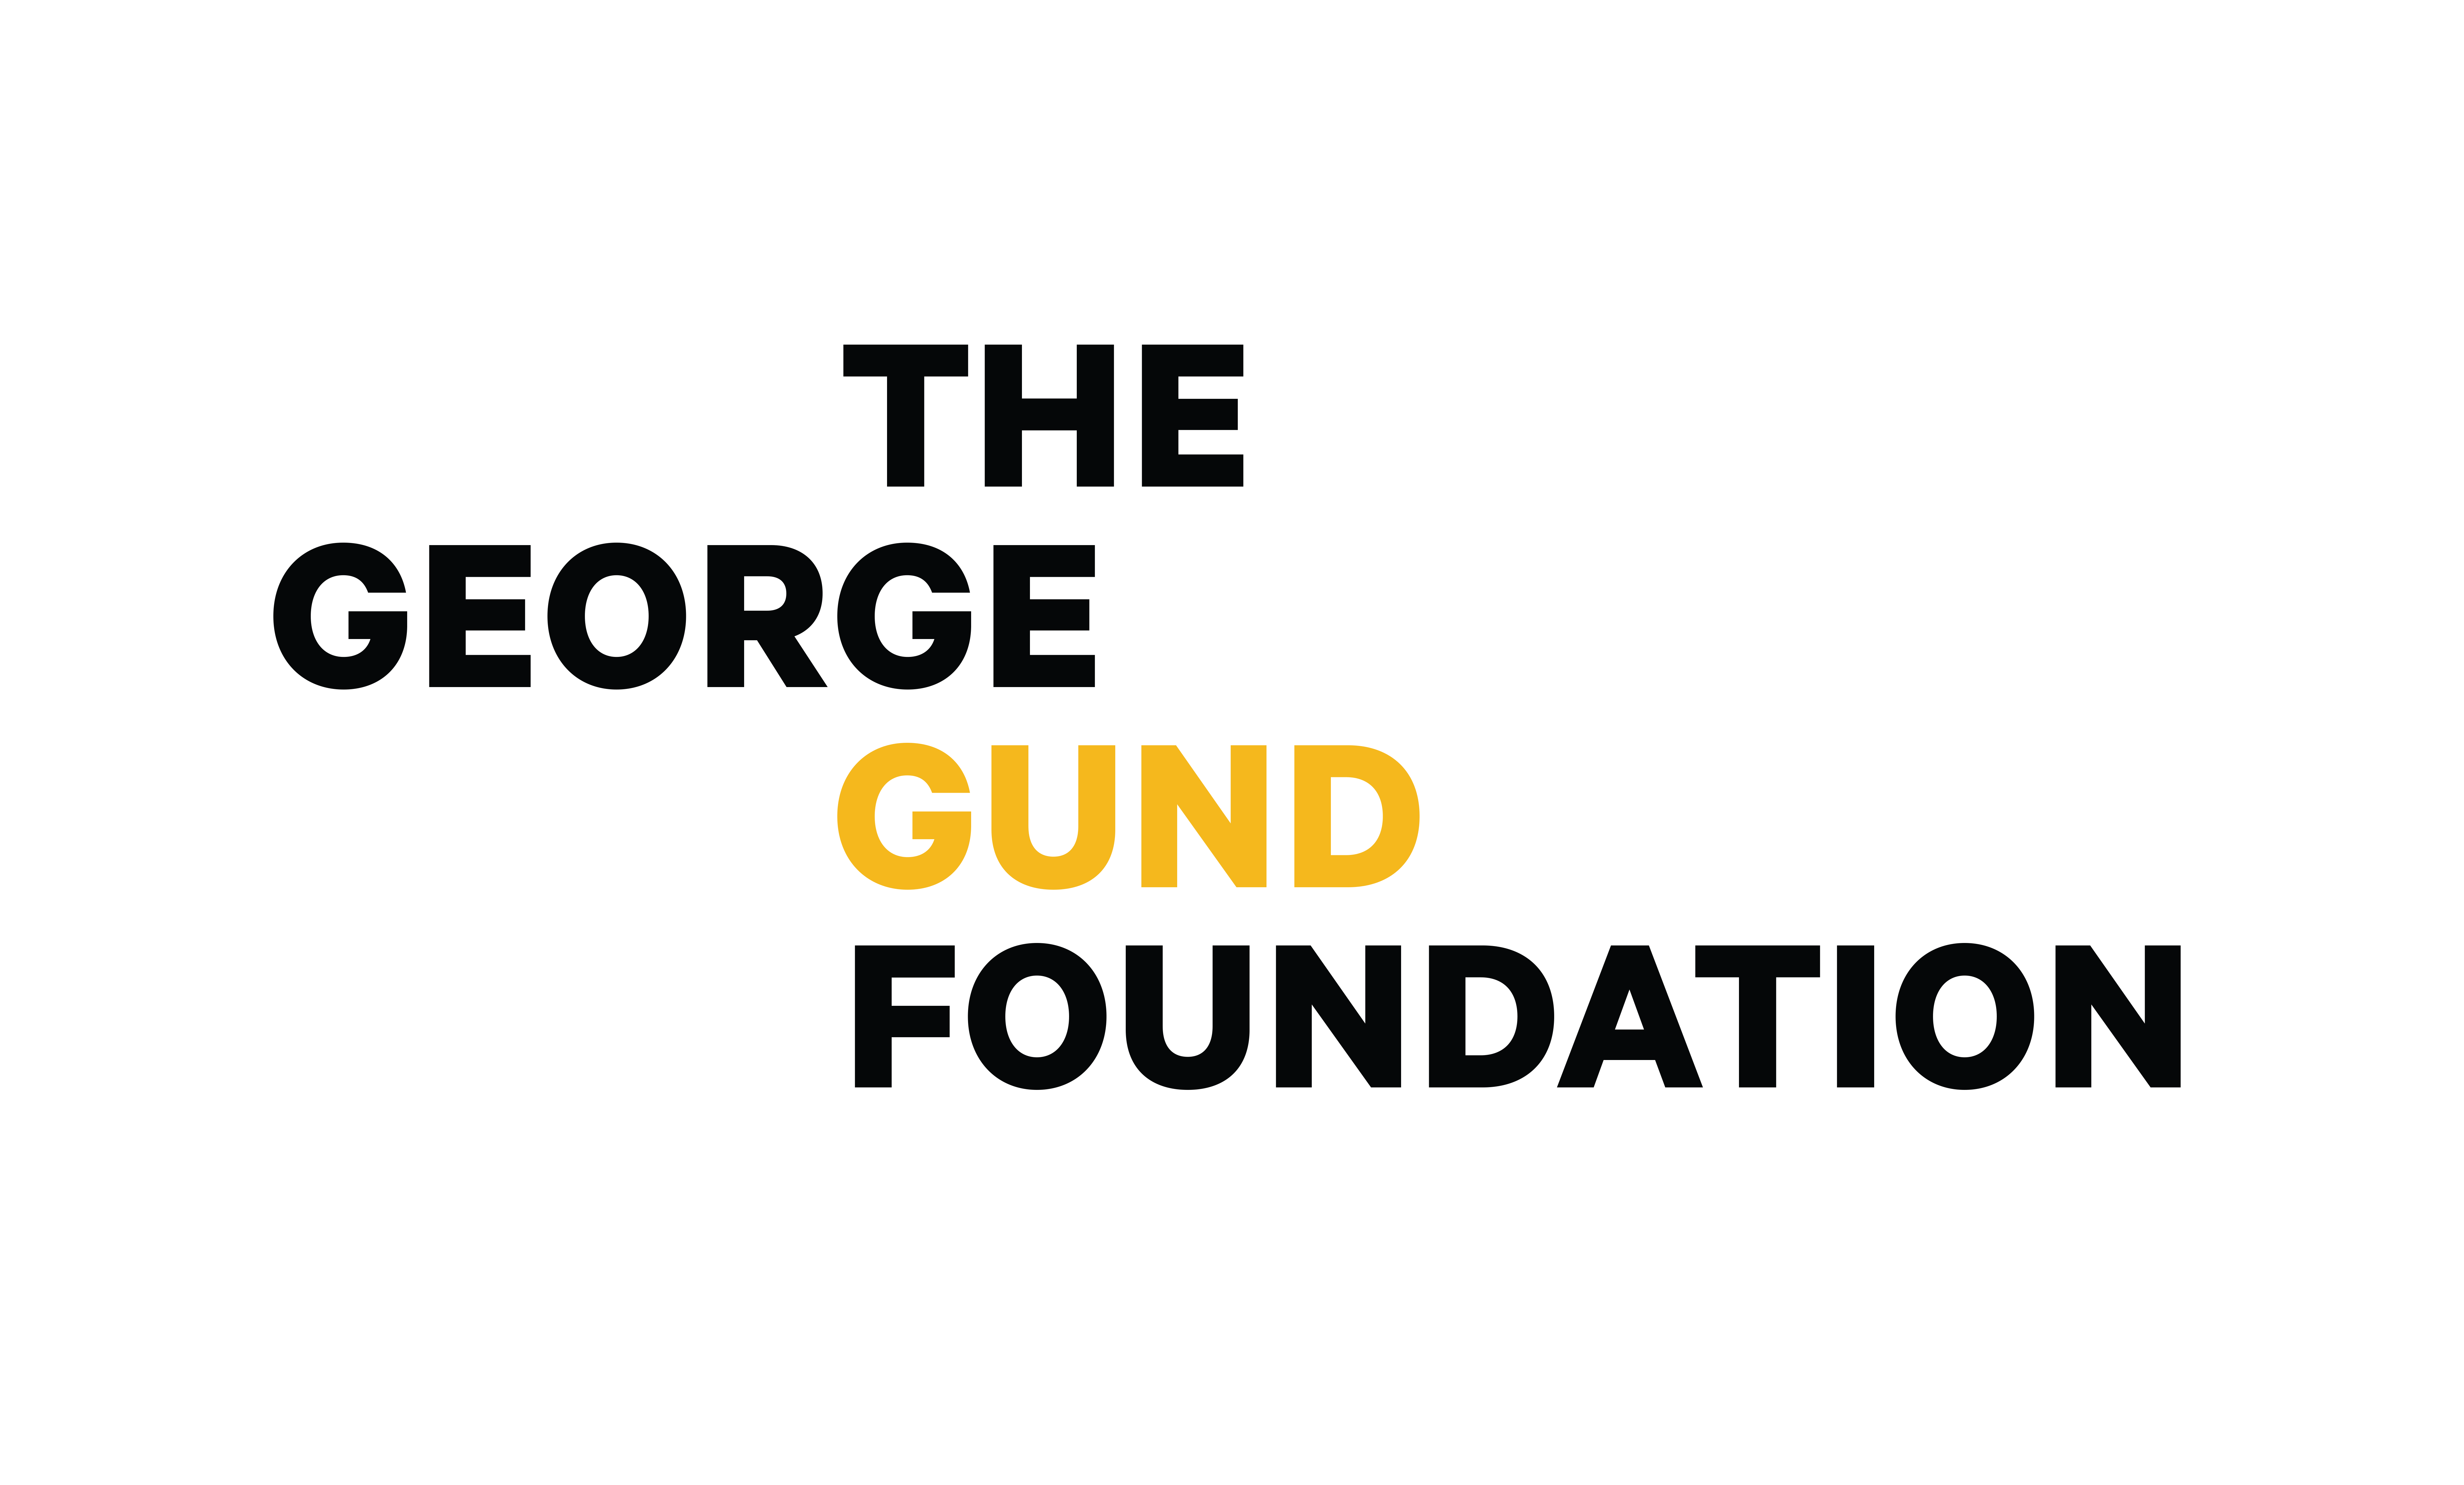 Looped animation showing The George Gund Foundation logo design in its brand palette of four colors